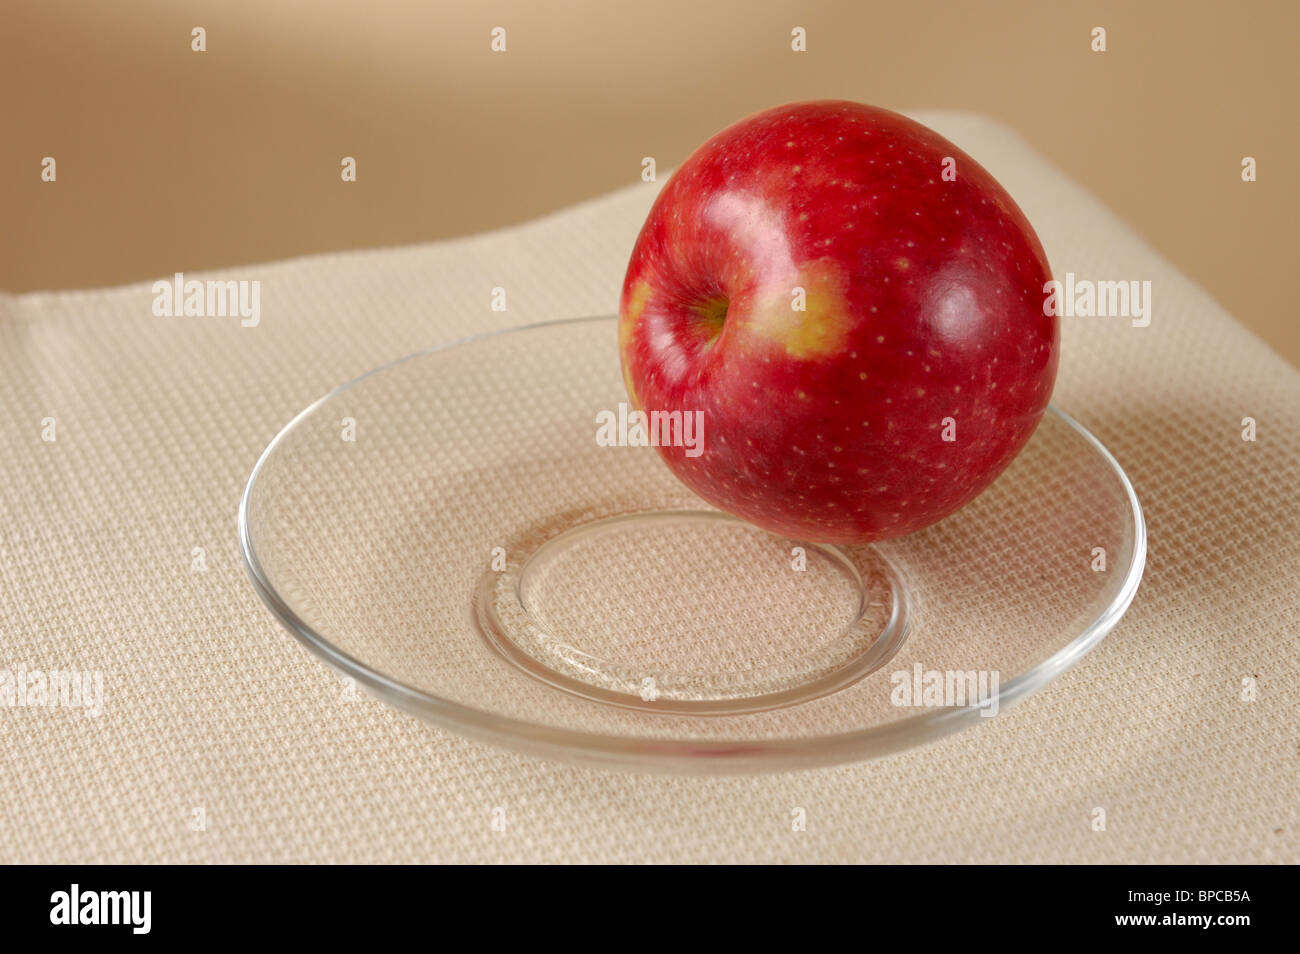 Red apple on plate still life Stock Photo